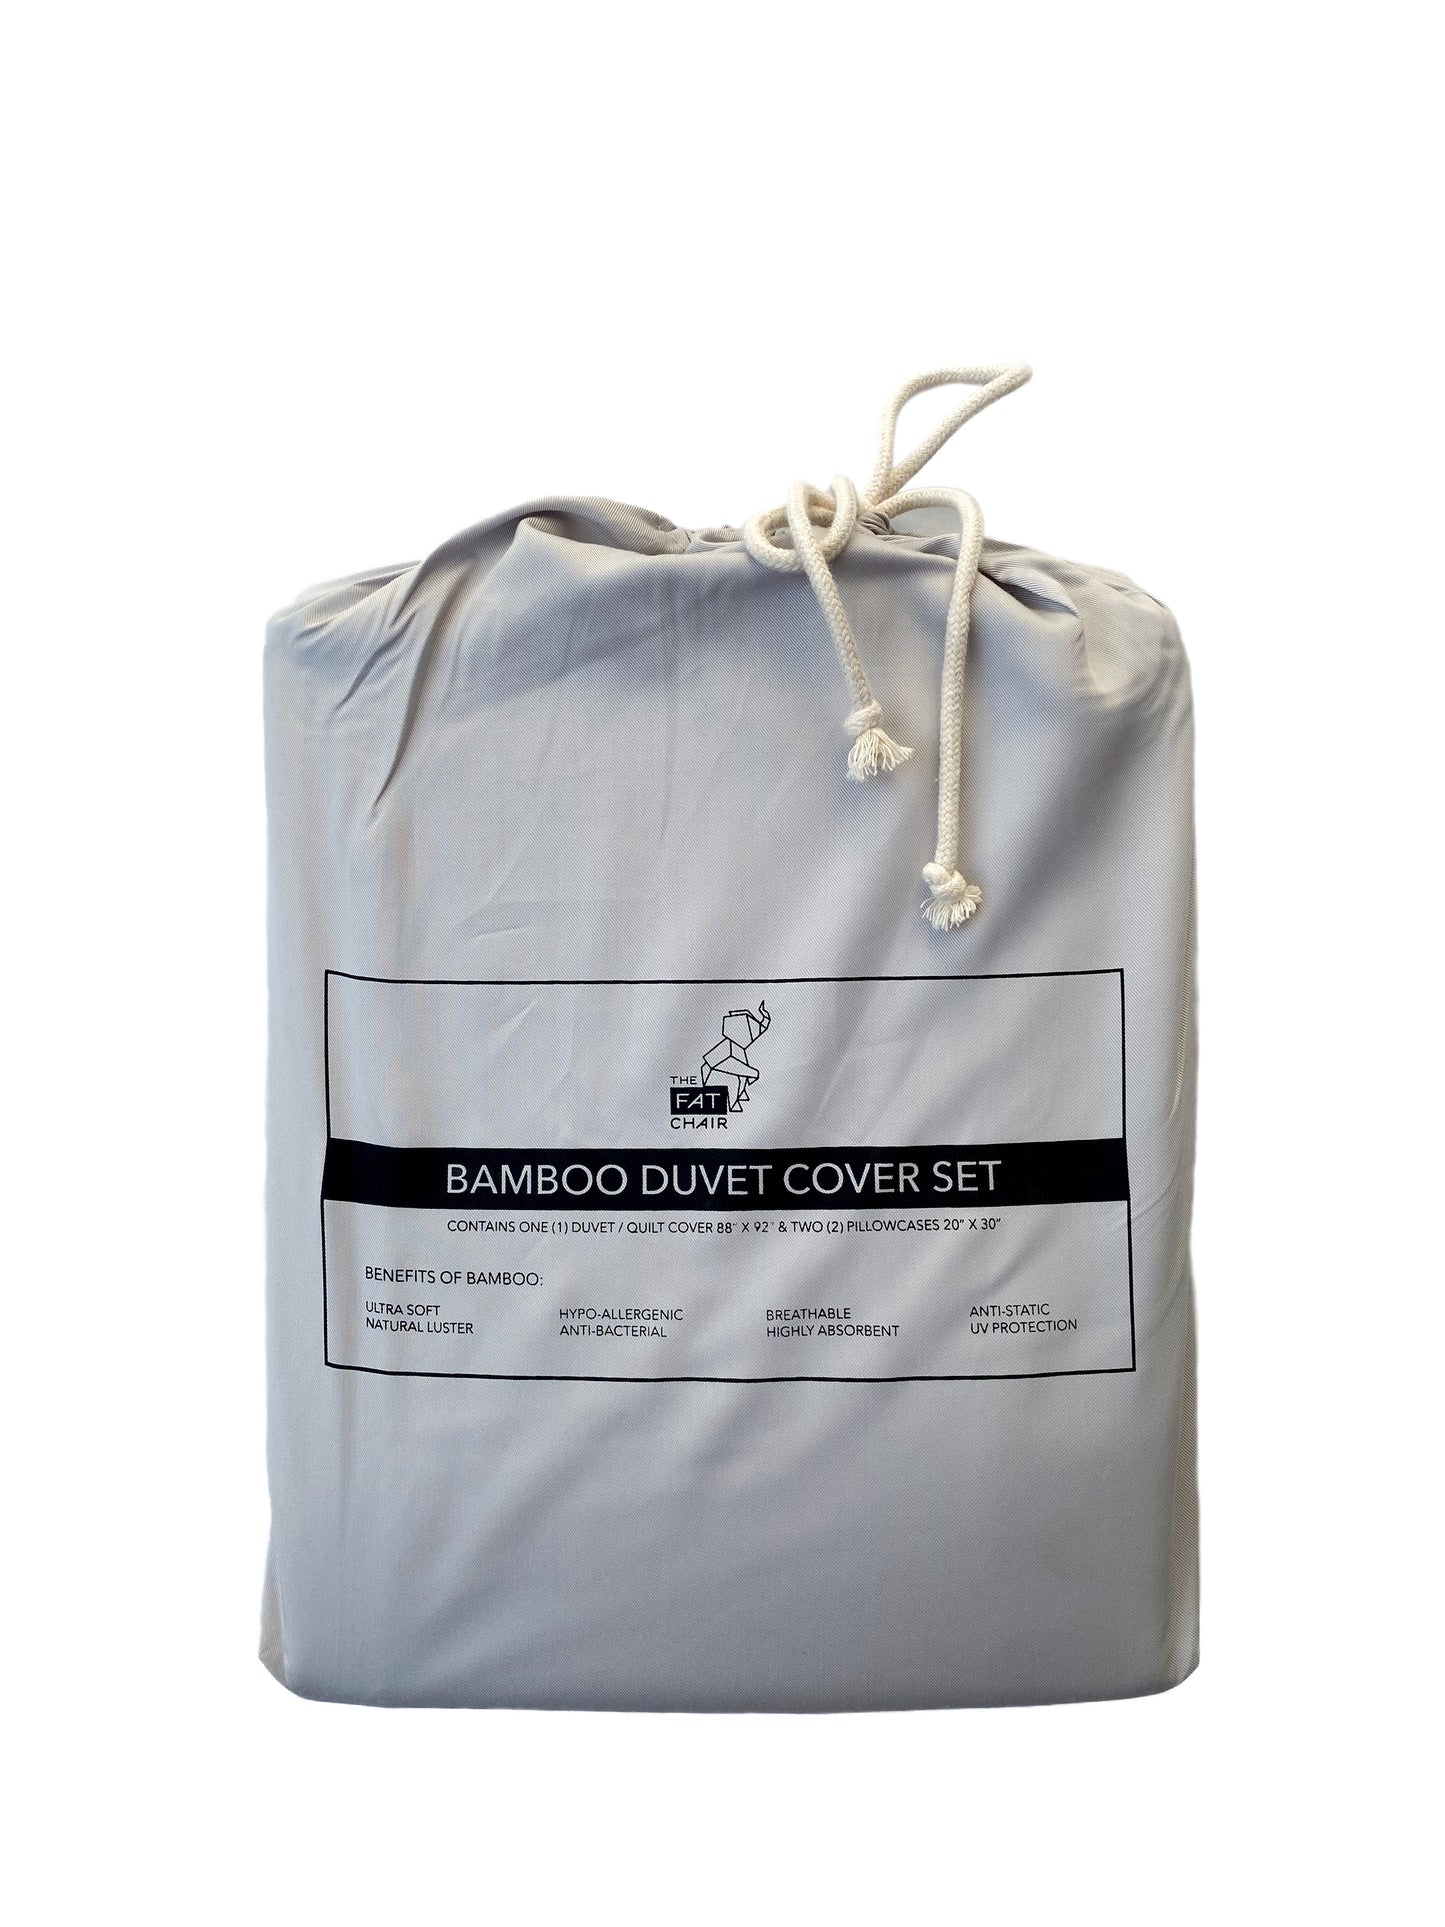 Bamboo Duvet Cover Set in Silver Gray